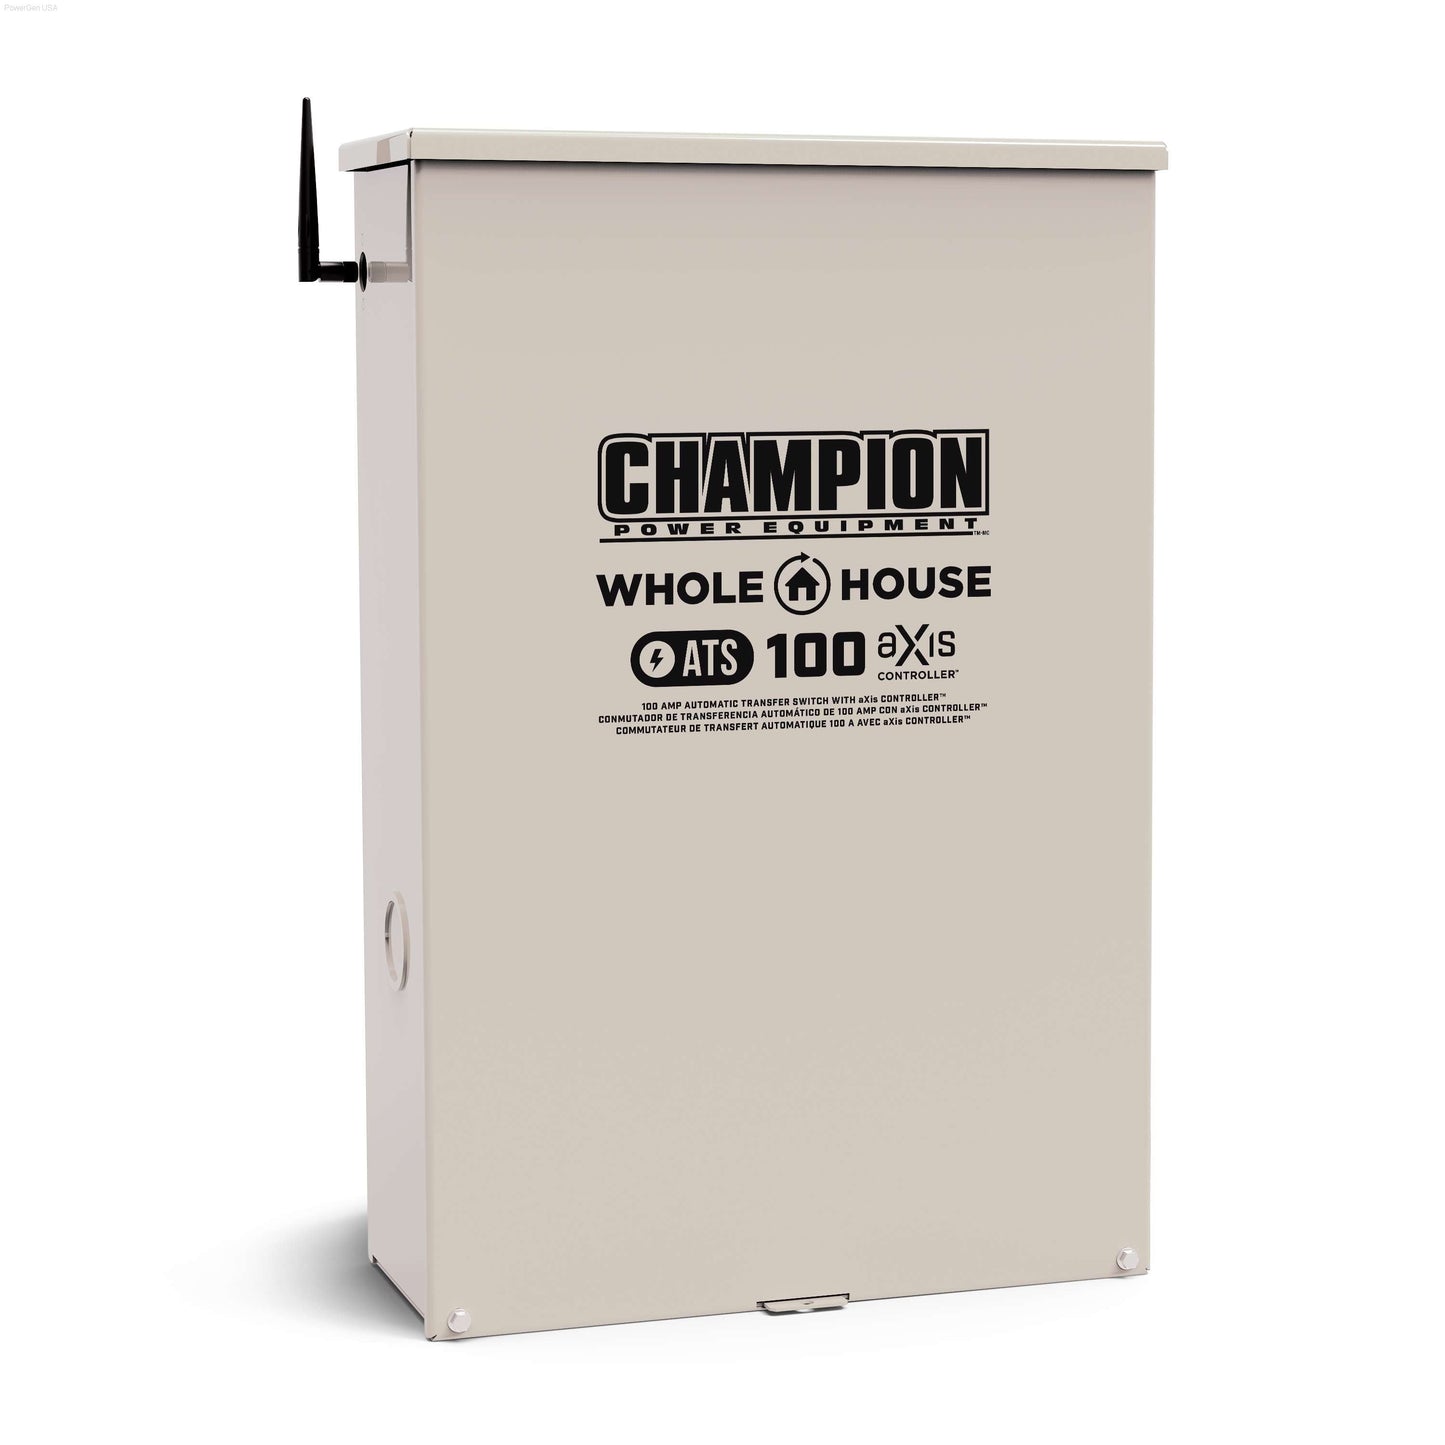 Dual Fuel Hybrid - Champion 14kW AXis Home Standby Generator System With 100-Amp AXis Automatic Transfer Switch